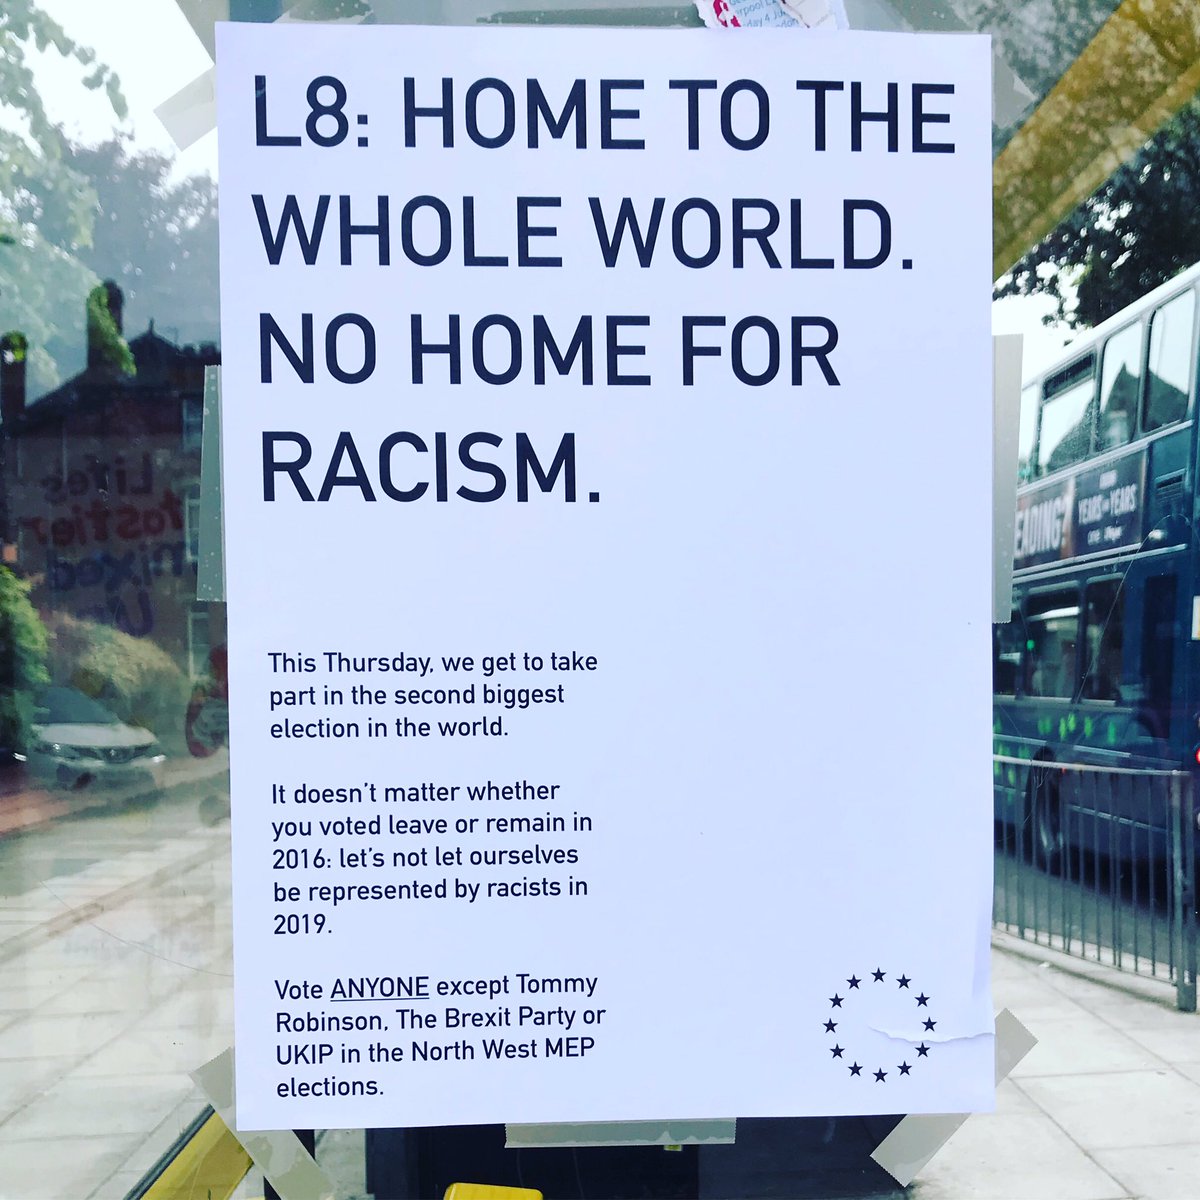 Make sure you get out to vote today. We don’t want that racist duffer representing us #ElectionResults2019 #standuptoracism